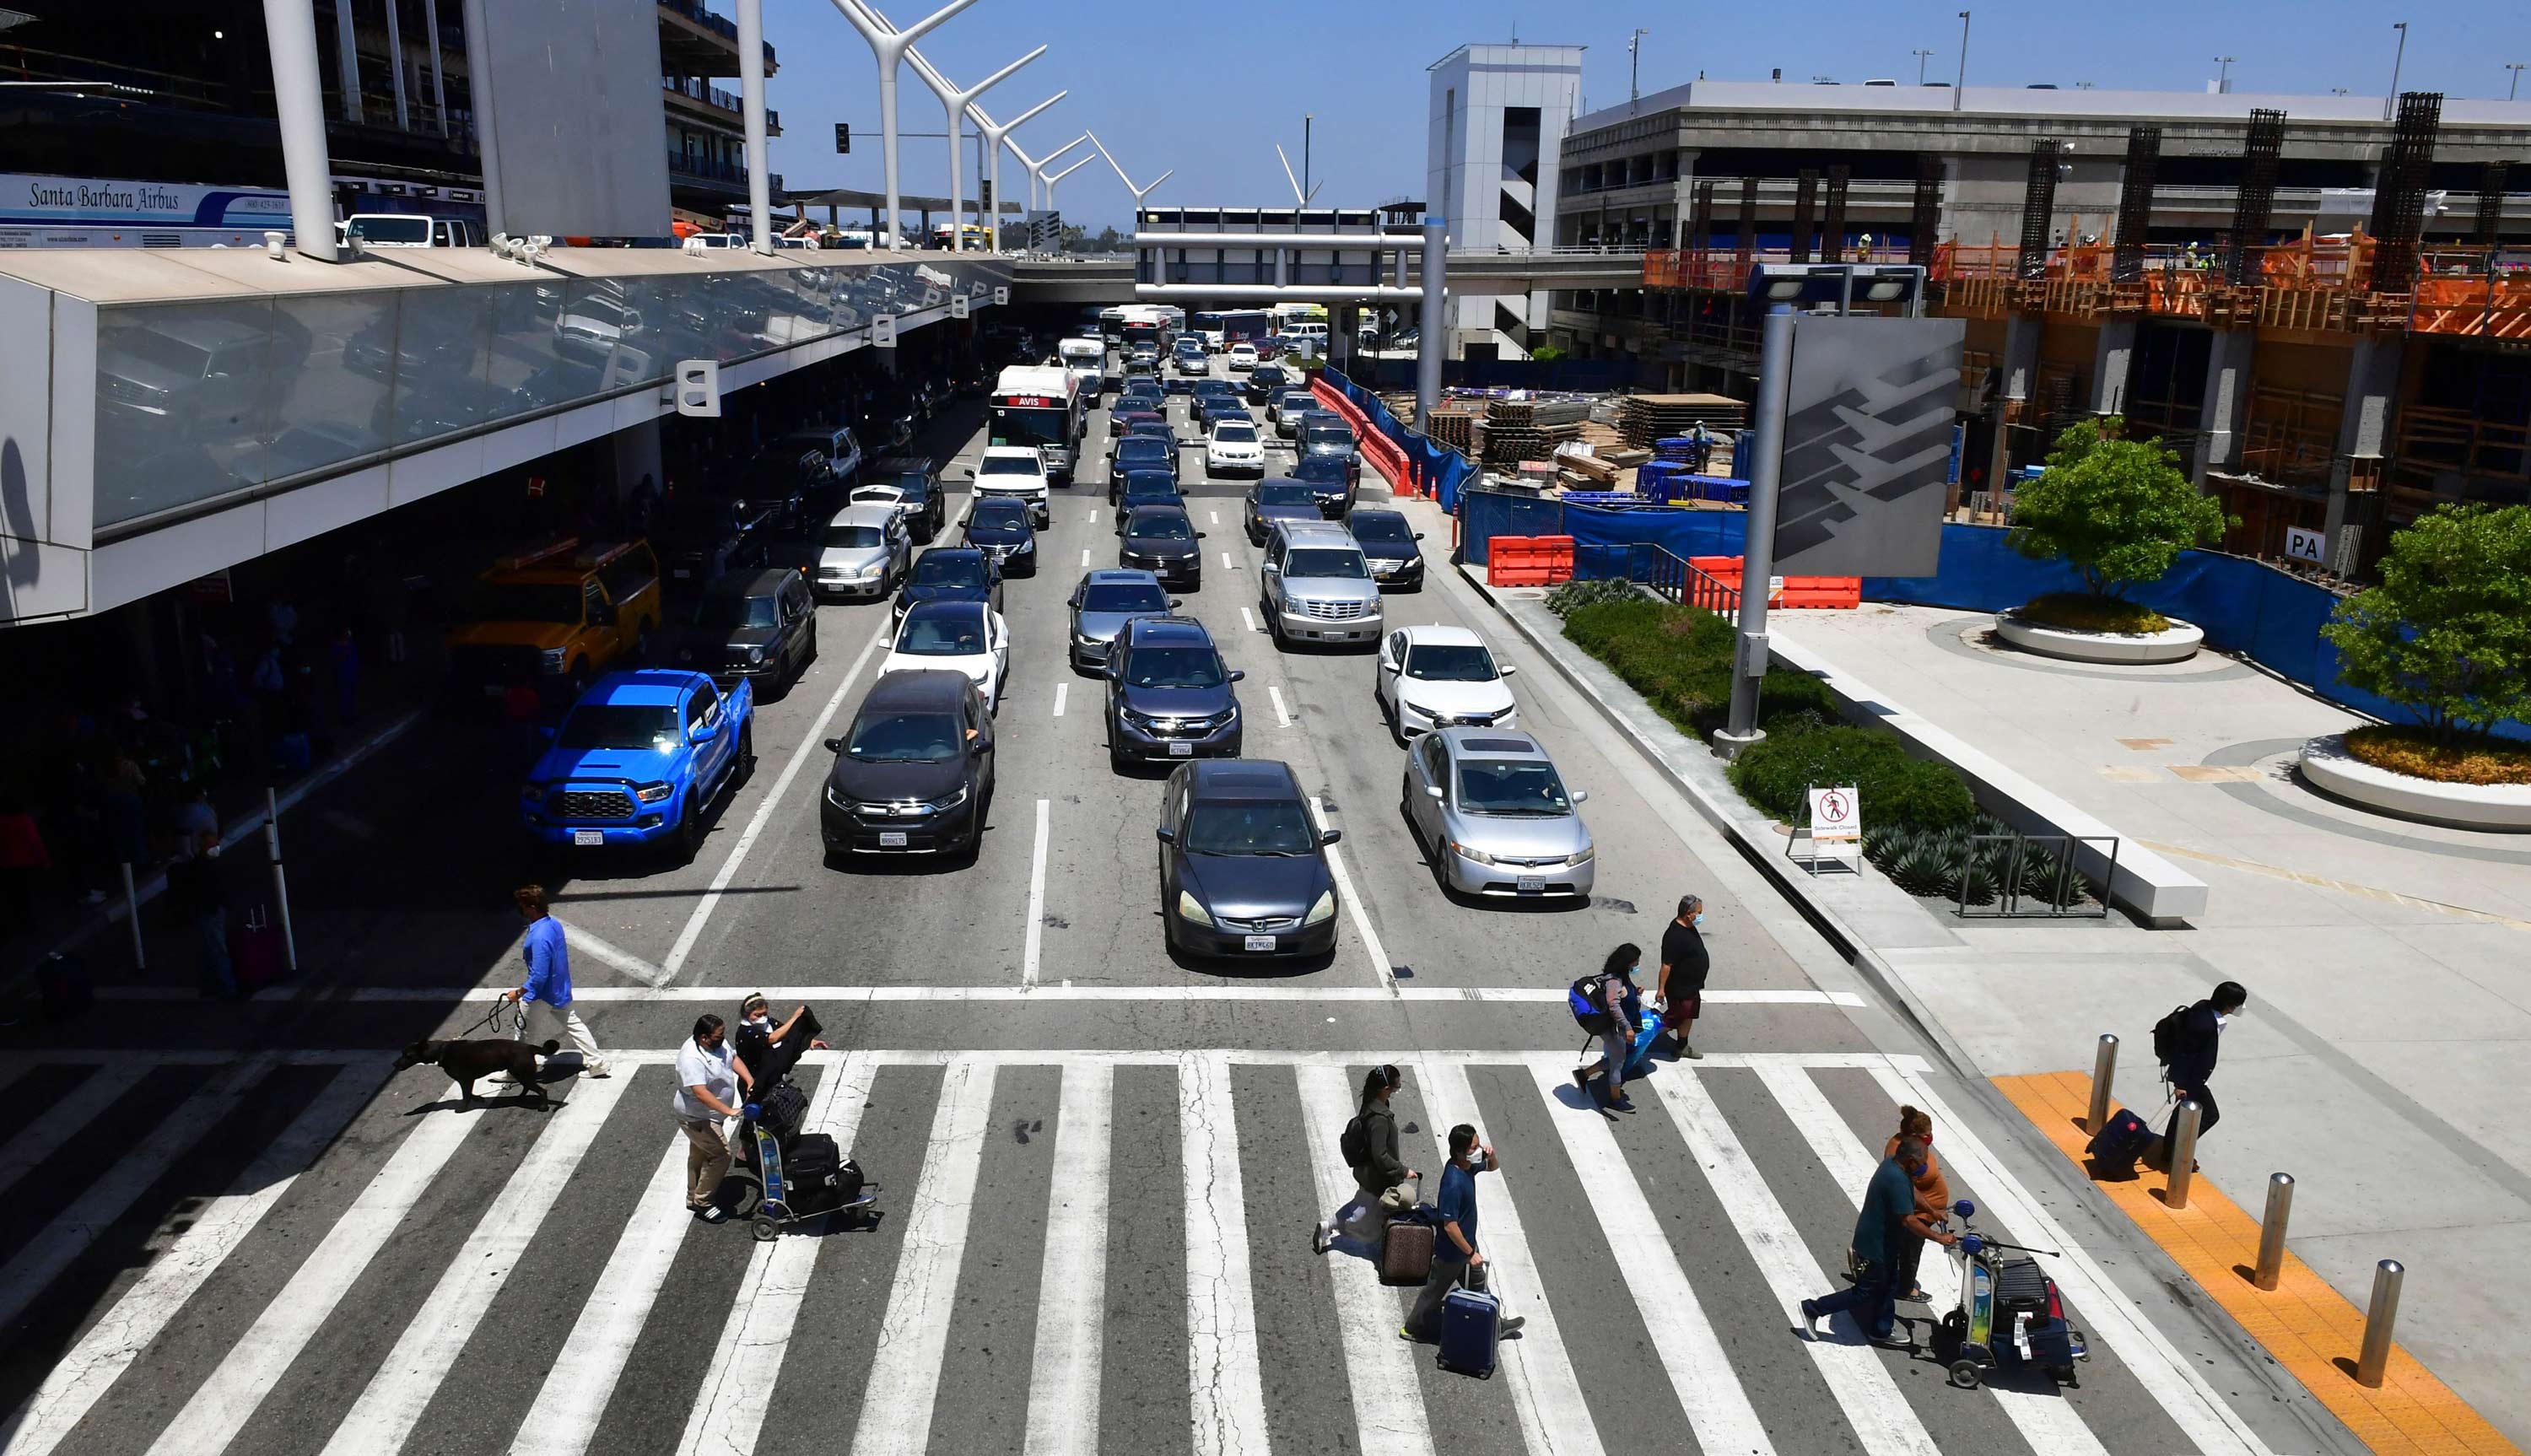 Travelers push their luggage on a crosswalk at Los Angeles International Airport on May 27 in Los Angeles.